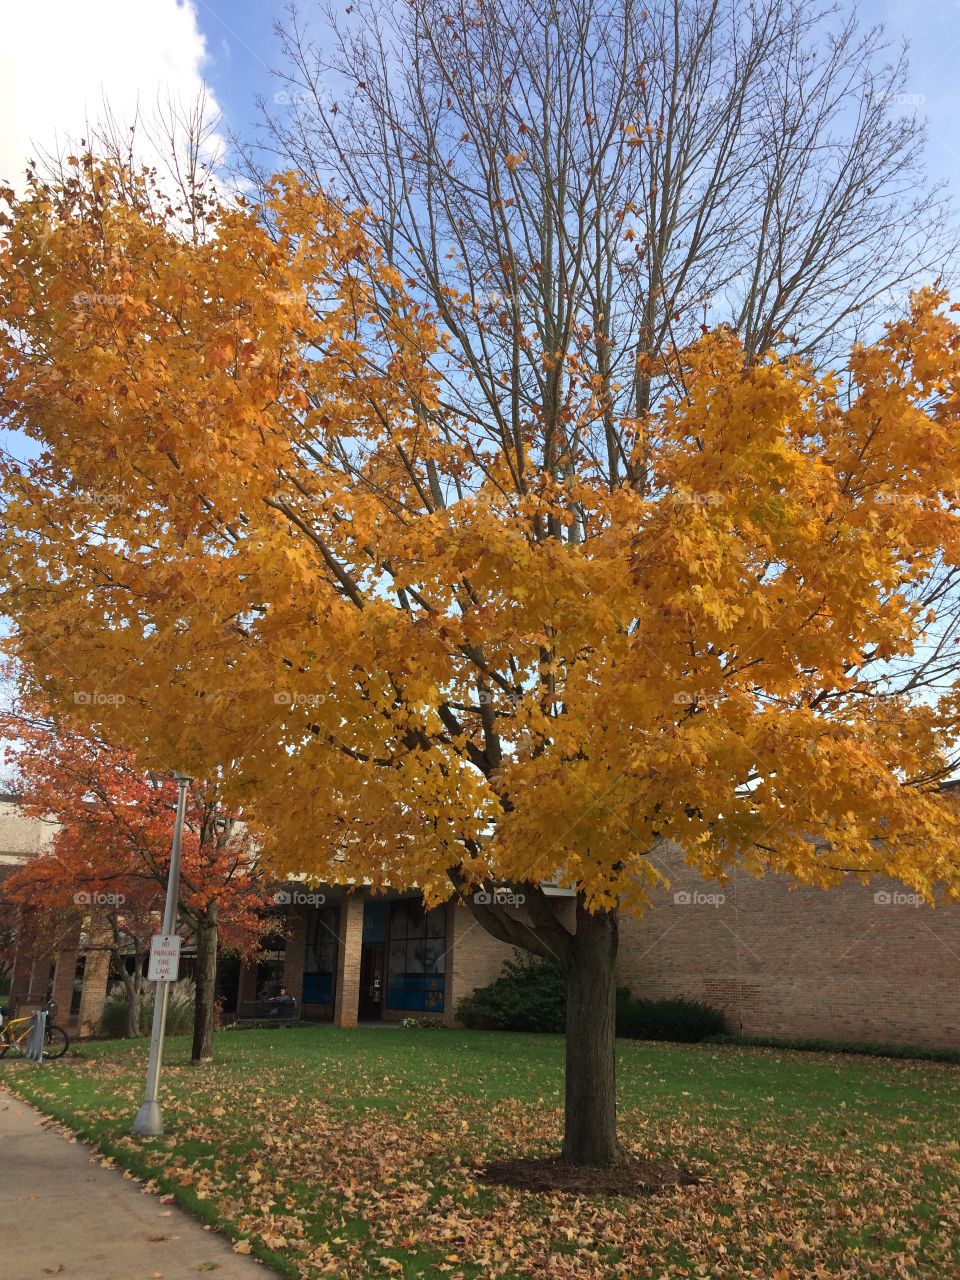 As leaves fall, a tree becomes bare, naked. But the ground is clothed in a blanket of bright colors after.